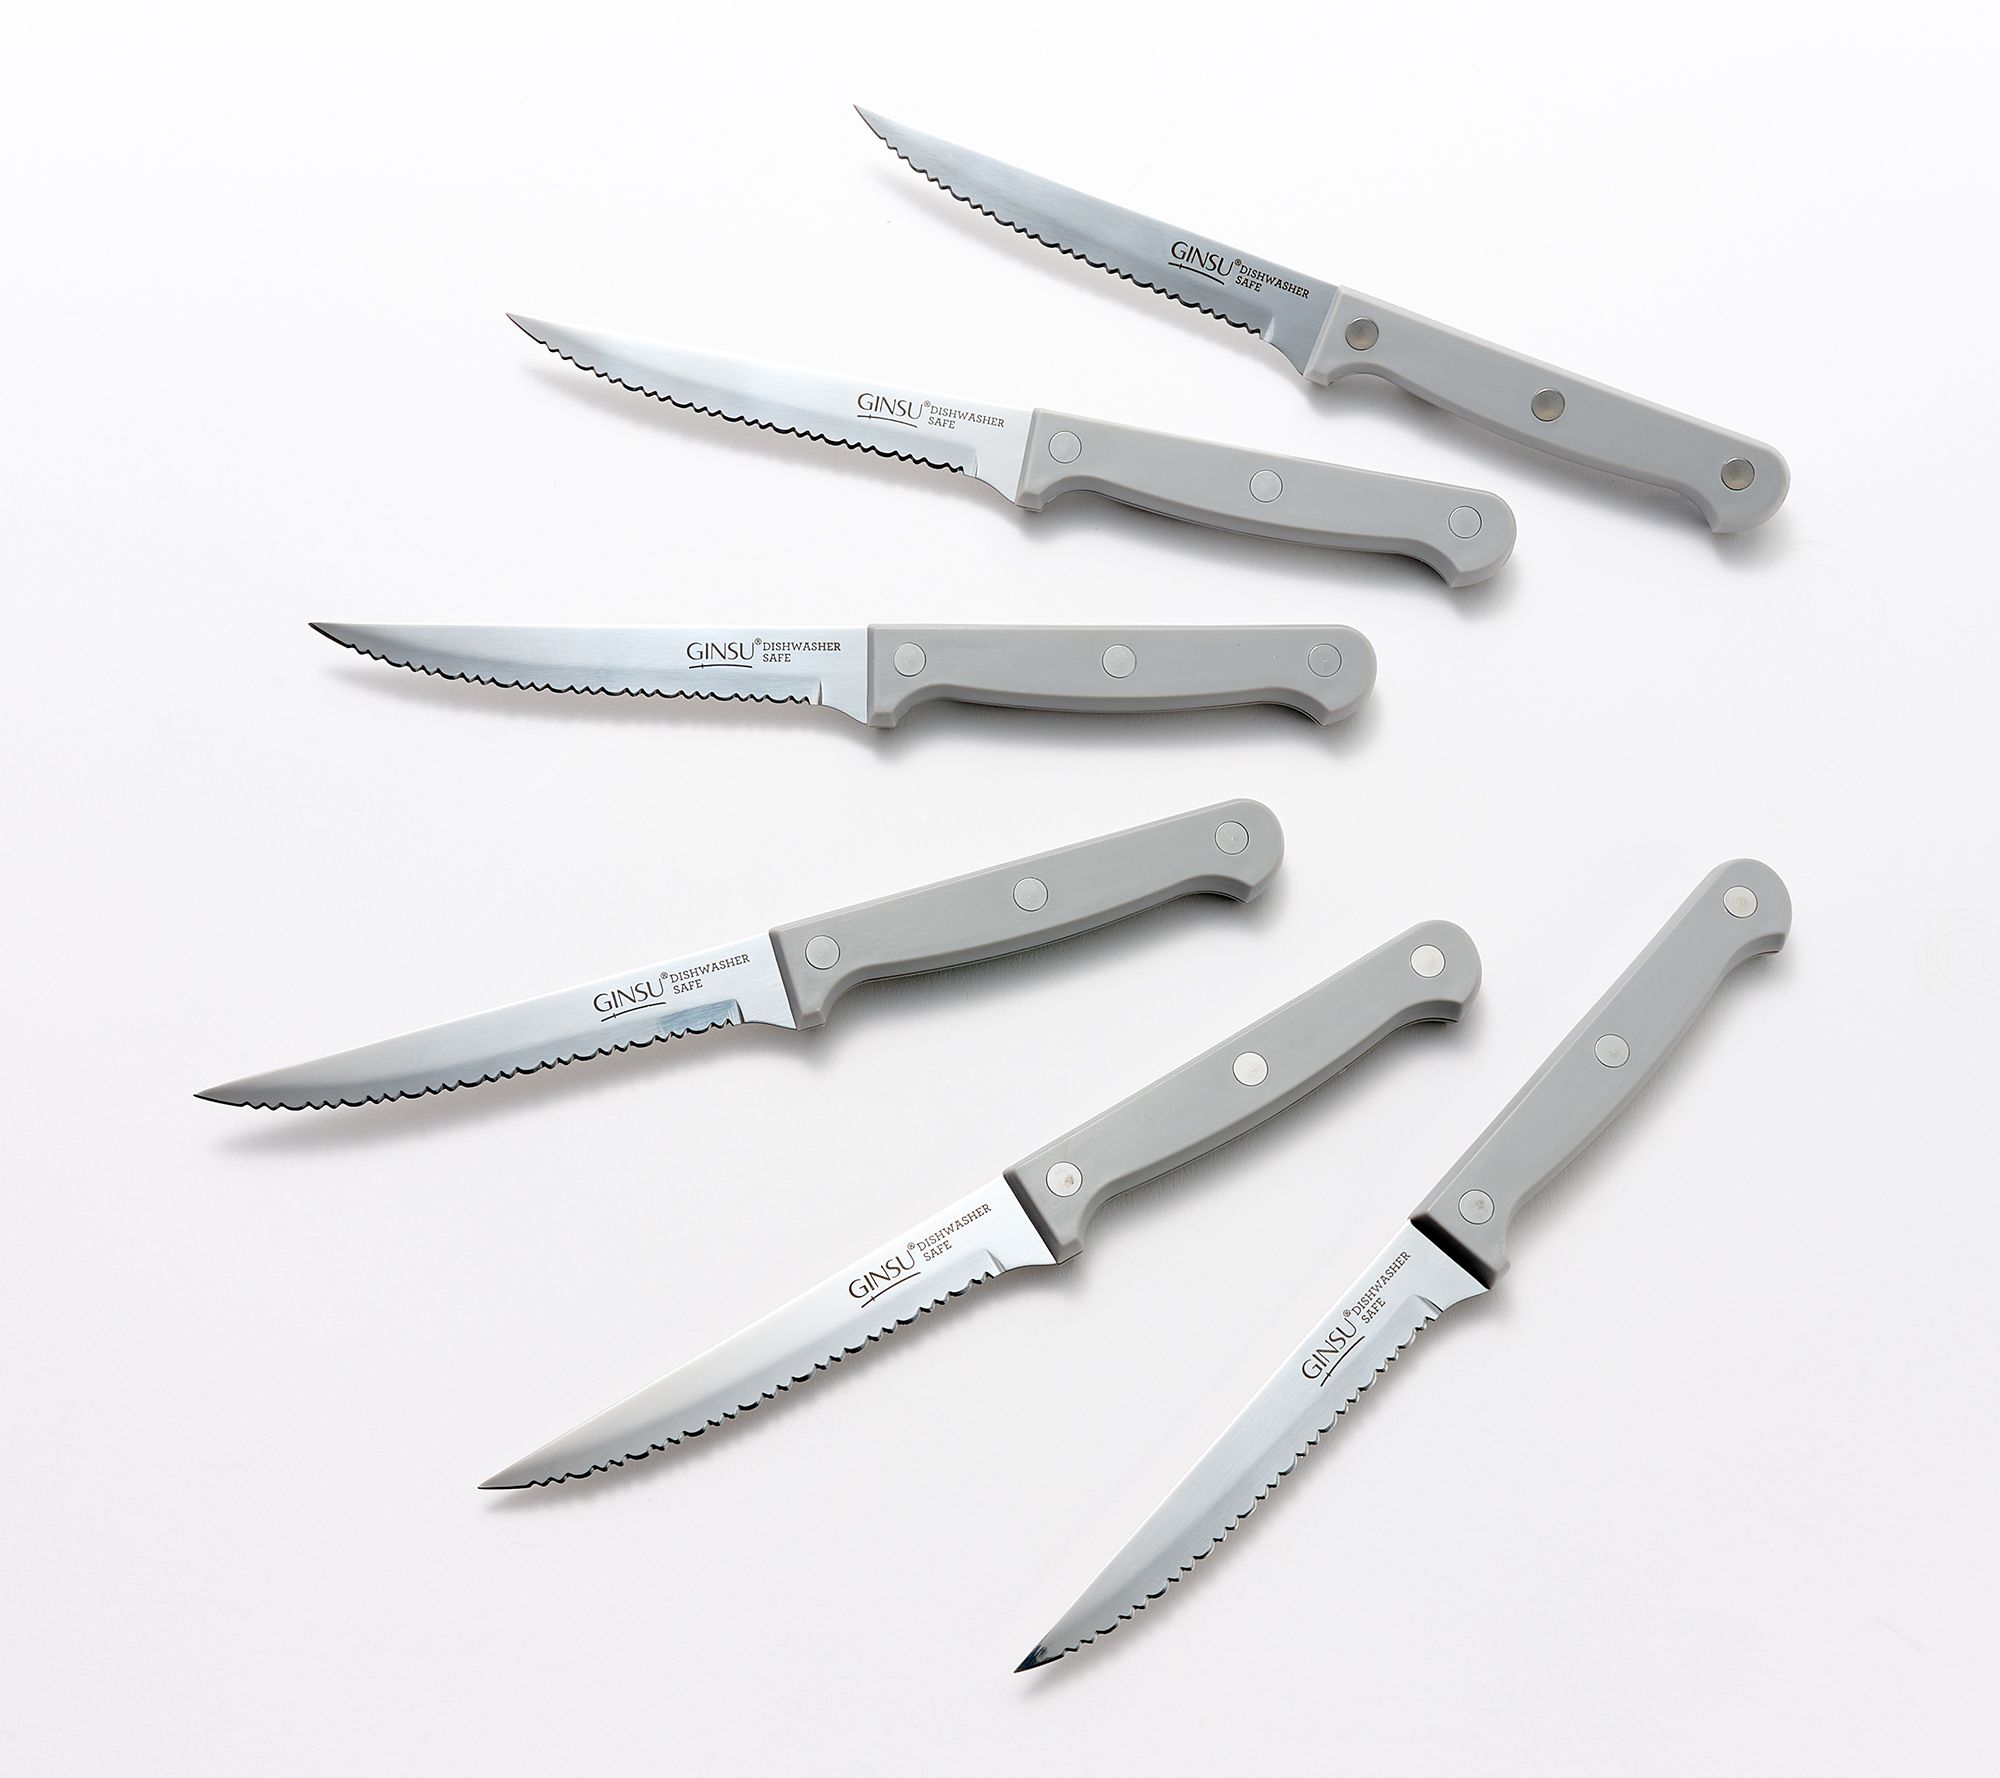 6 Piece Steak Knife Set, Grey, Sold by at Home